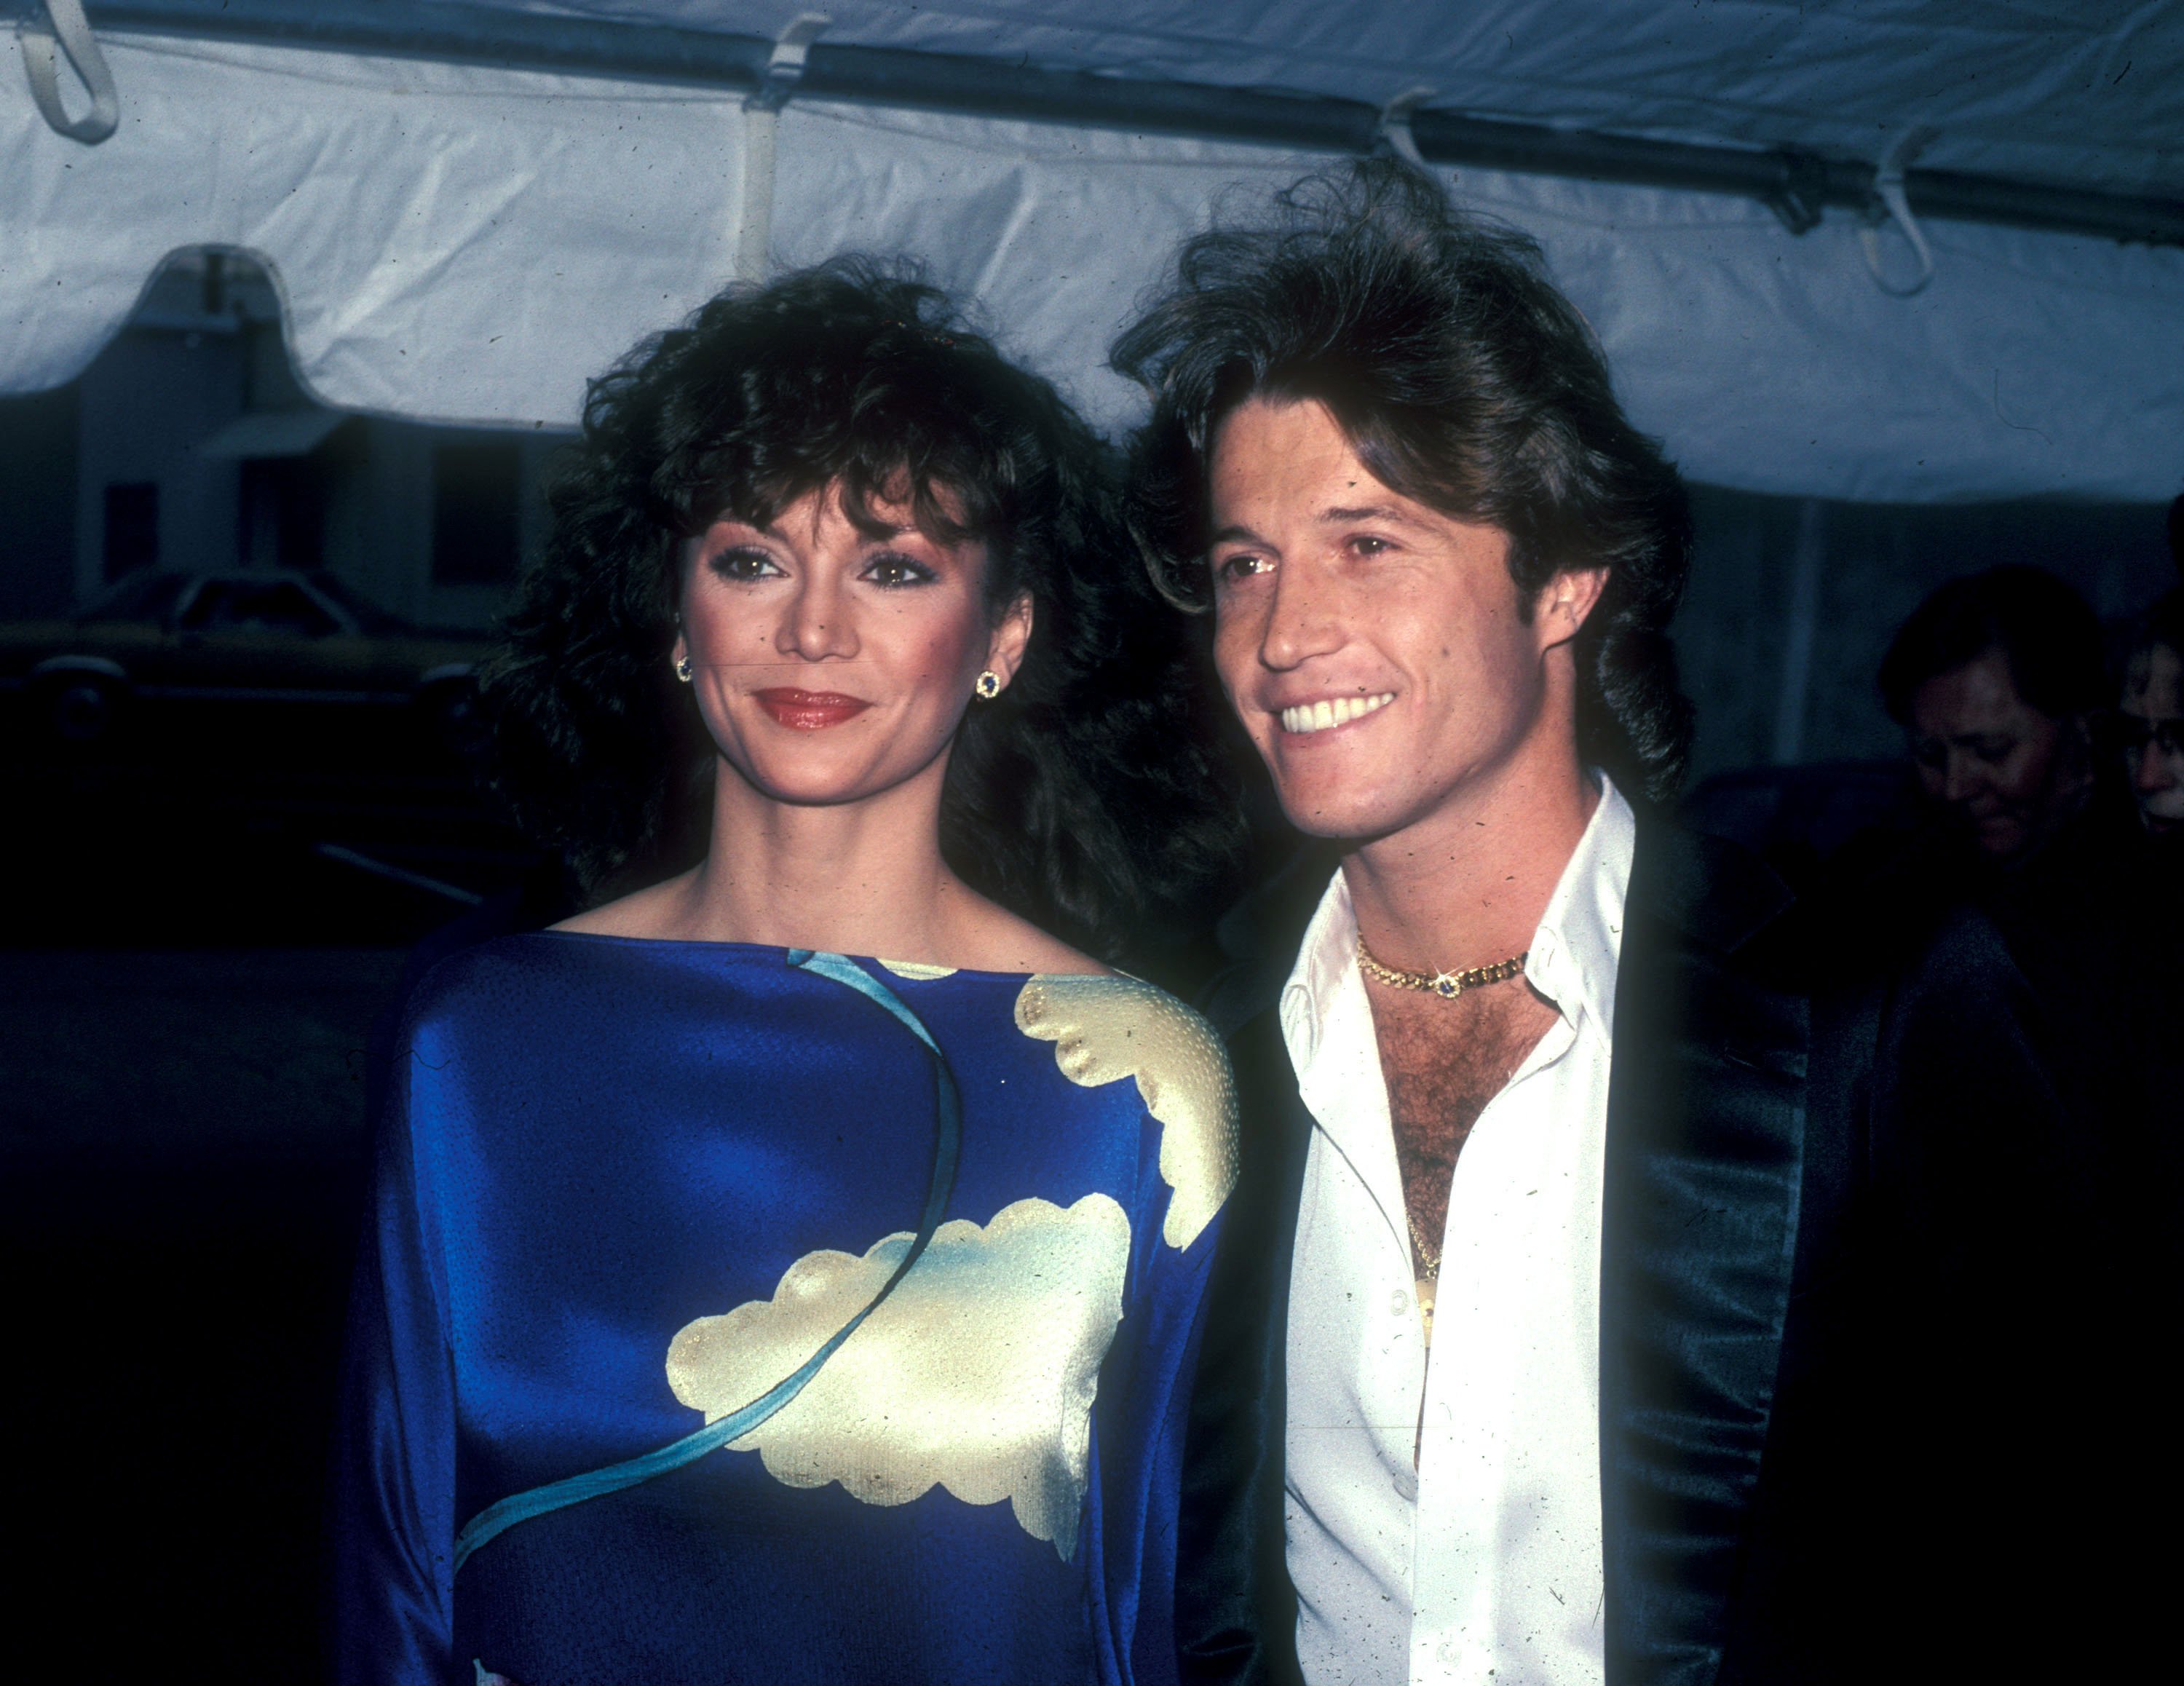 1981 file photo of Victoria Principal & Andy Gibb attending the Peoples Choice Awards. | Source: Getty Images 